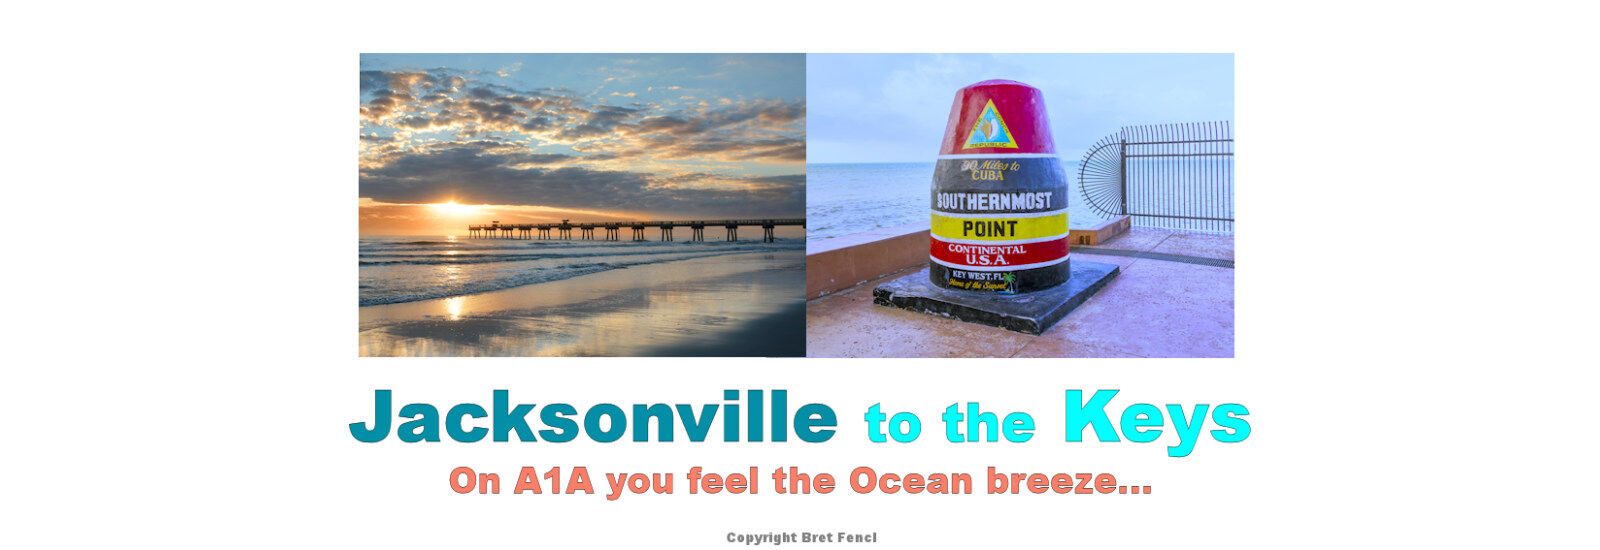 Jacksonville to the Keys, on A1A you feel the Ocean breeze...